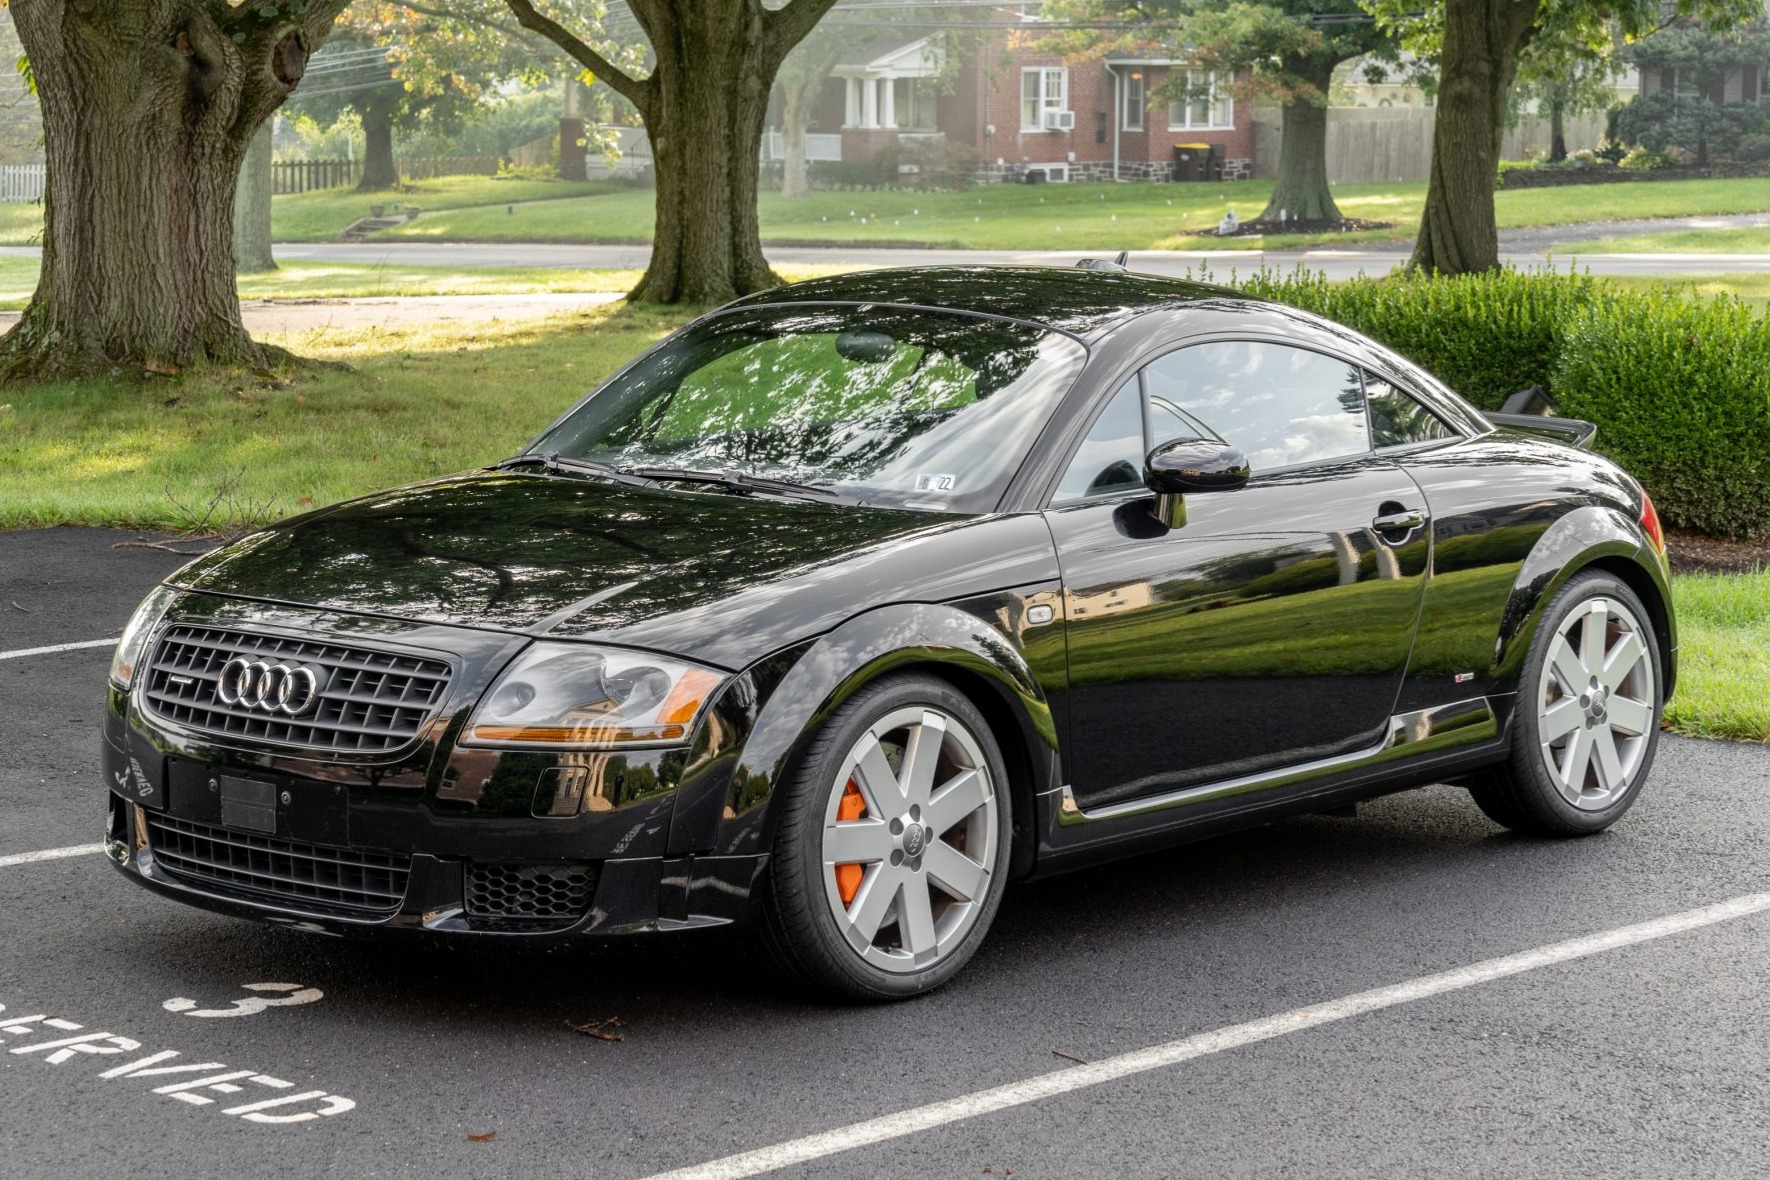 8k-Mile Turbocharged 2005 Audi TT 3.2 Quattro 6-Speed for sale on BaT  Auctions - closed on October 13, 2021 (Lot #57,271) | Bring a Trailer